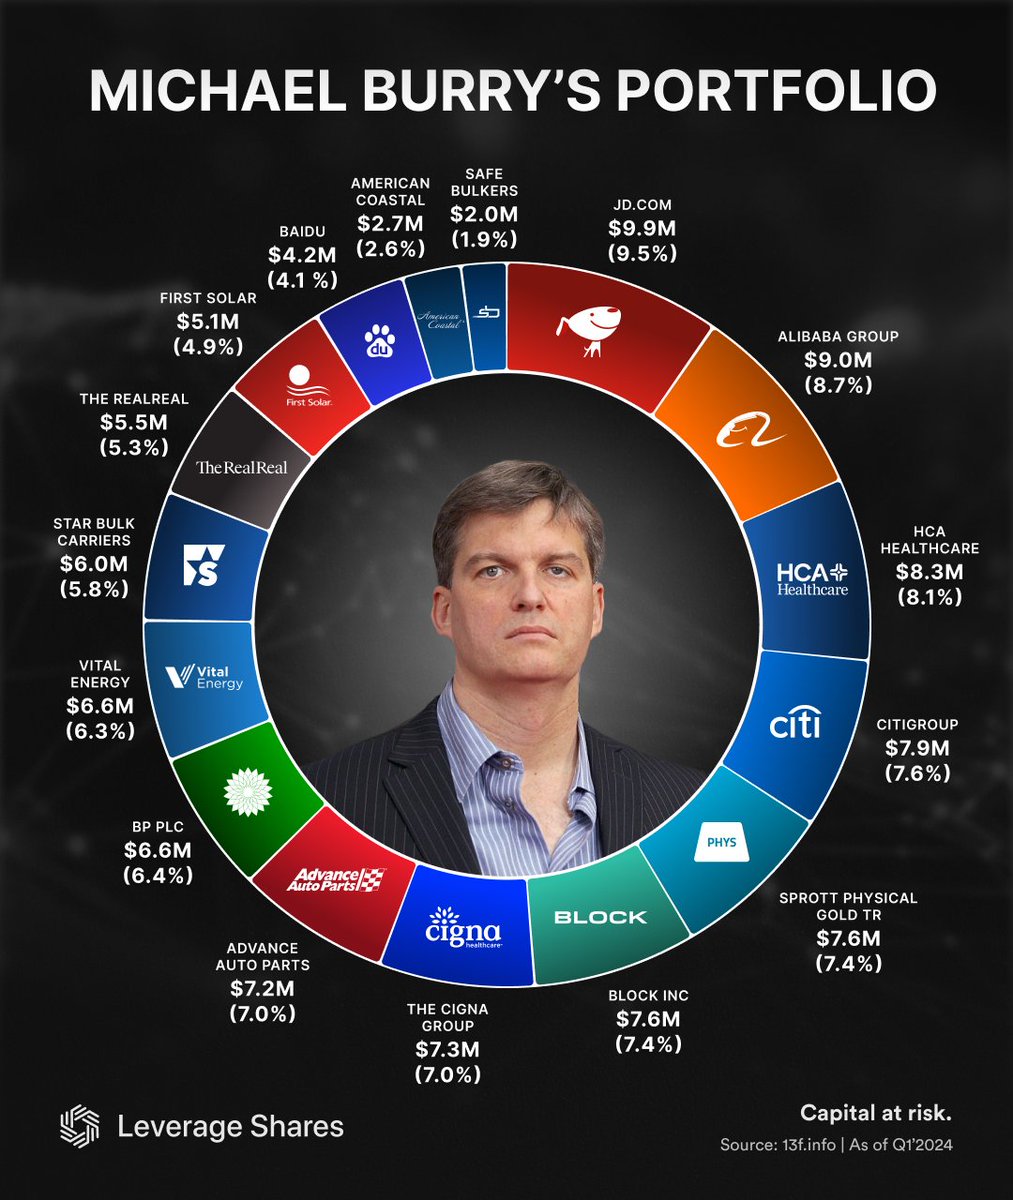 Burry's Recent Shift to Gold & More 📈 In Q1 2024, Burry's total holdings rose from $95M to $103M. 🔝 holdings: - $C - $JD - $HCA - $PHYS - $BABA ➕ New buys: - $BP - $CI - $PHYS 📈 Key increases: - $JD - $BABA ❌ Sold out: - $CVS - $ORCL What's your take on Michael Burry's